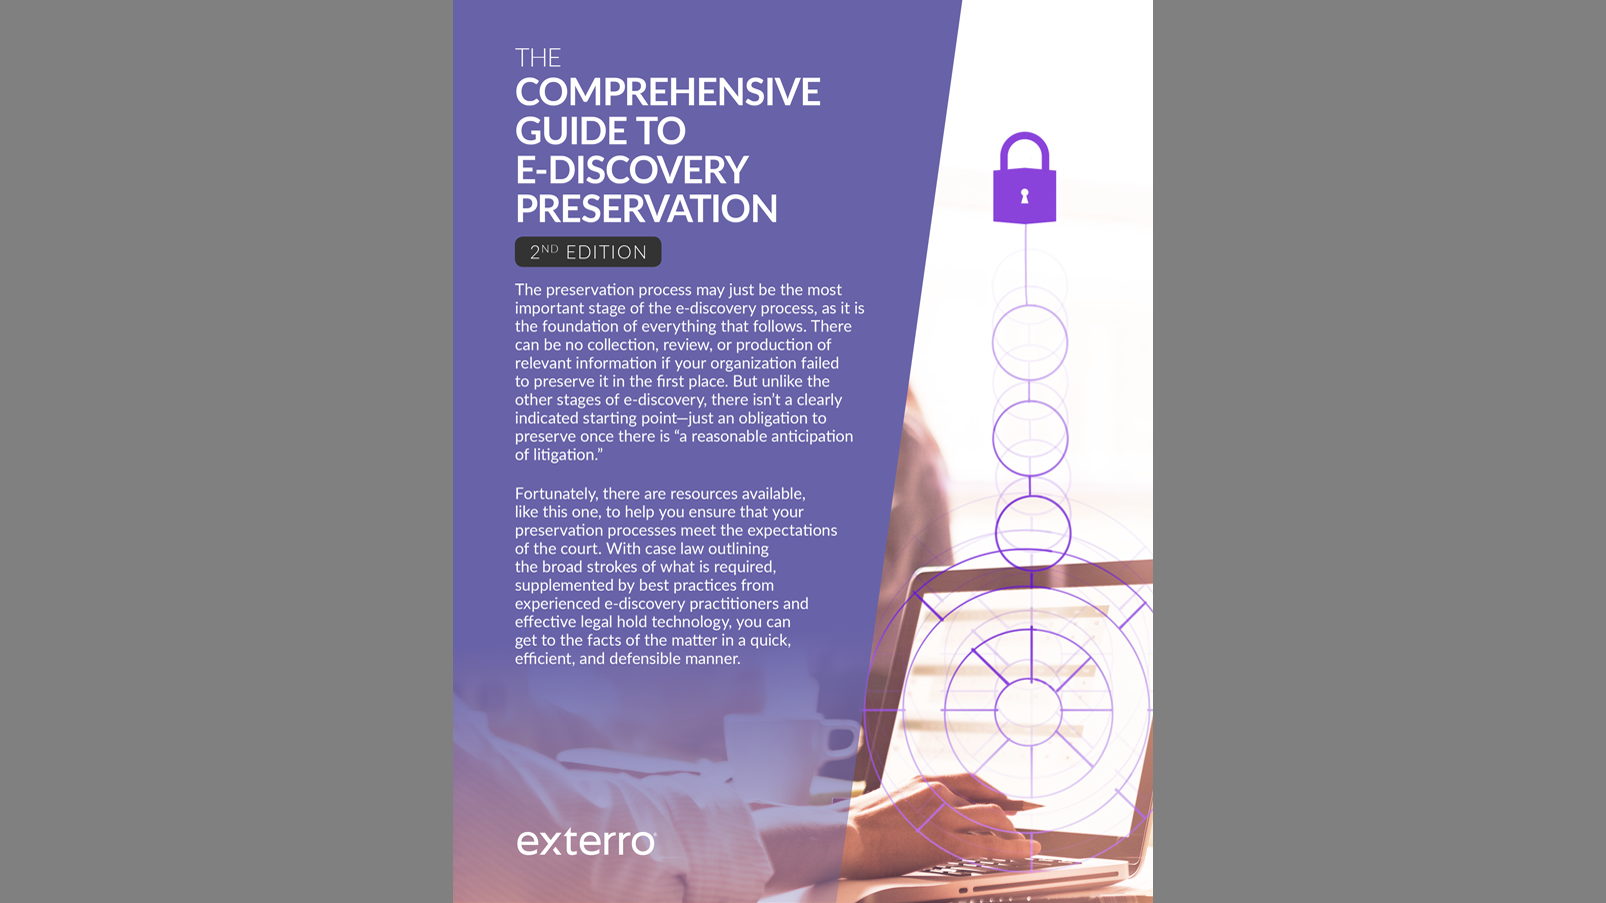 Featured Resource: The Complete Guide to E-Discovery Preservation, 2nd Edition